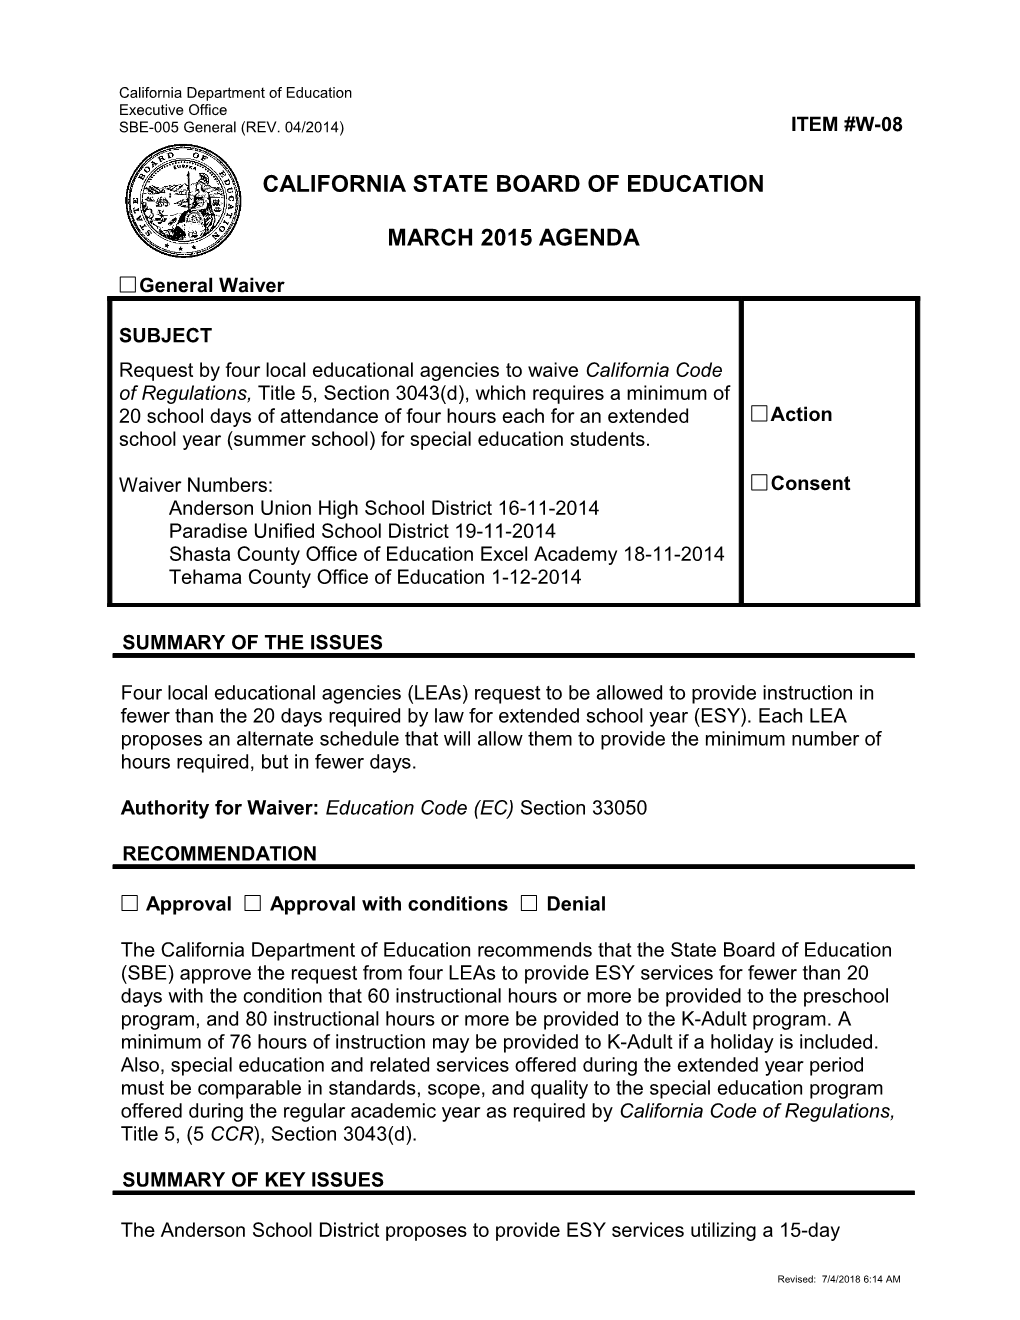 March 2015 Waiver Item W-08 - Meeting Agendas (CA State Board of Education)